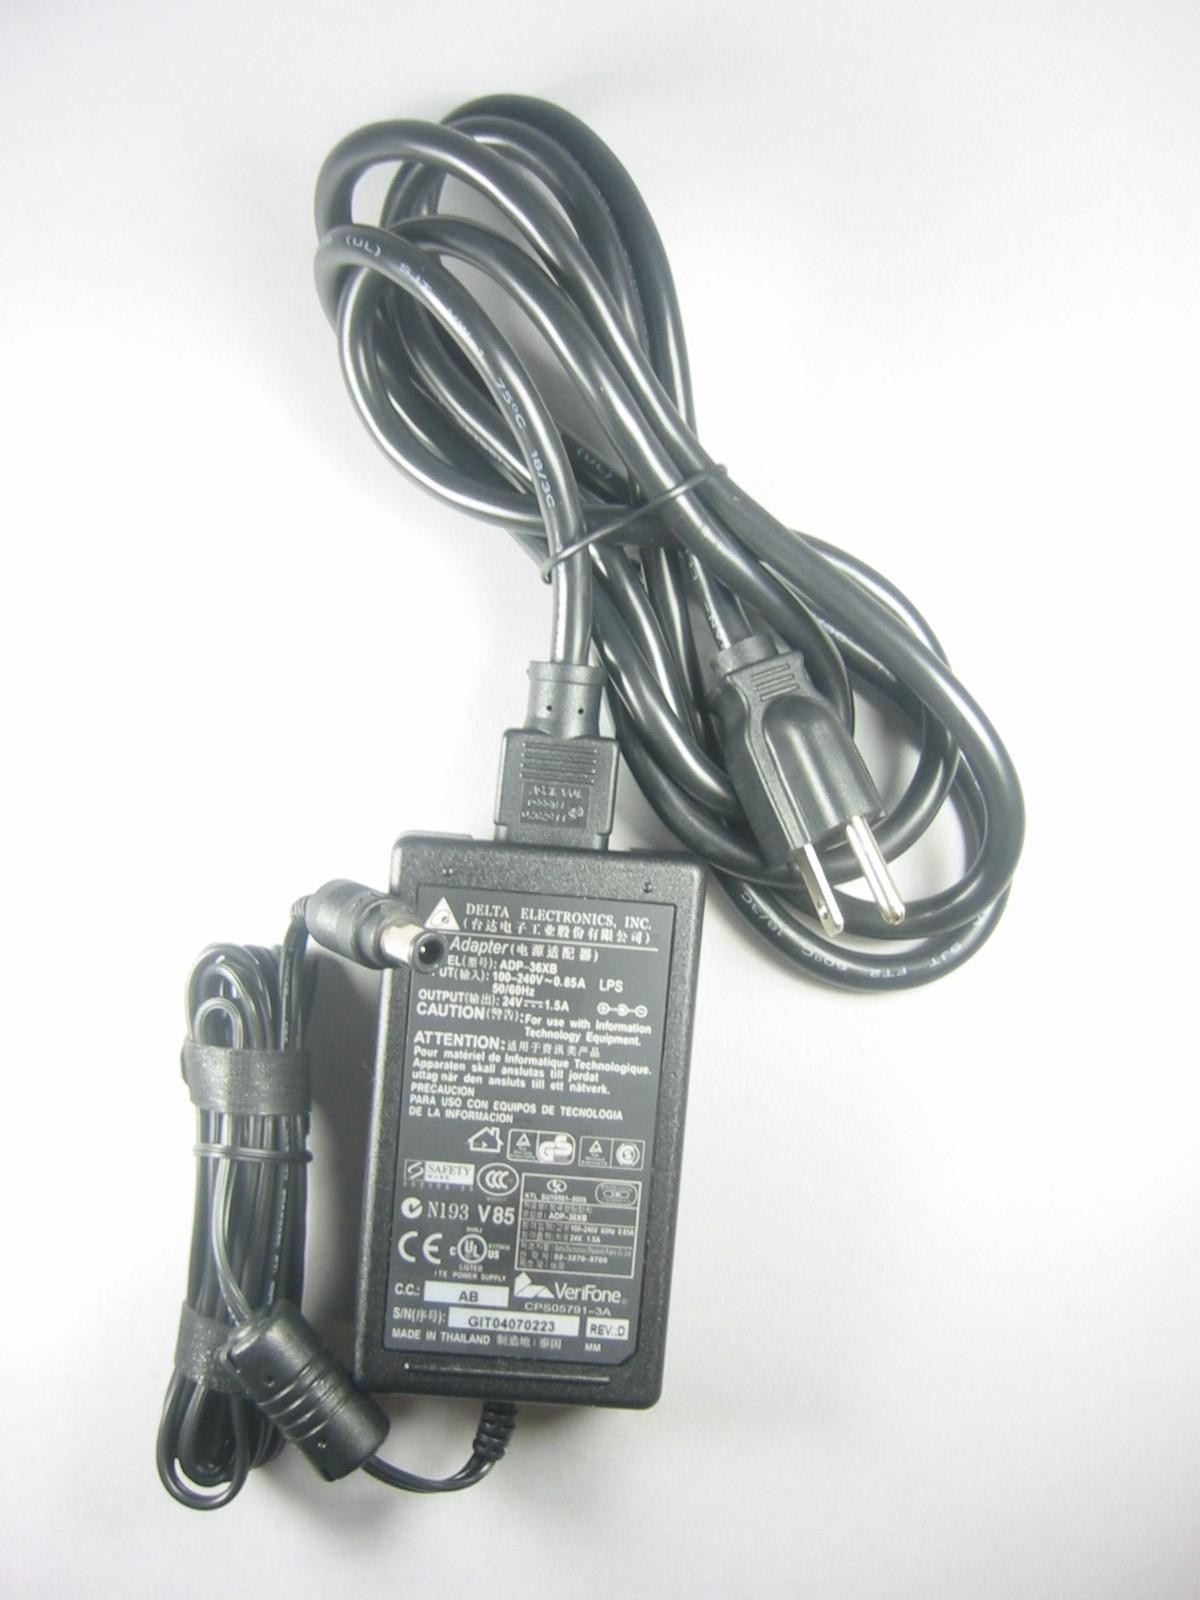 Power Supply for Verifone Terminals 3740 / 3750 - Click Image to Close